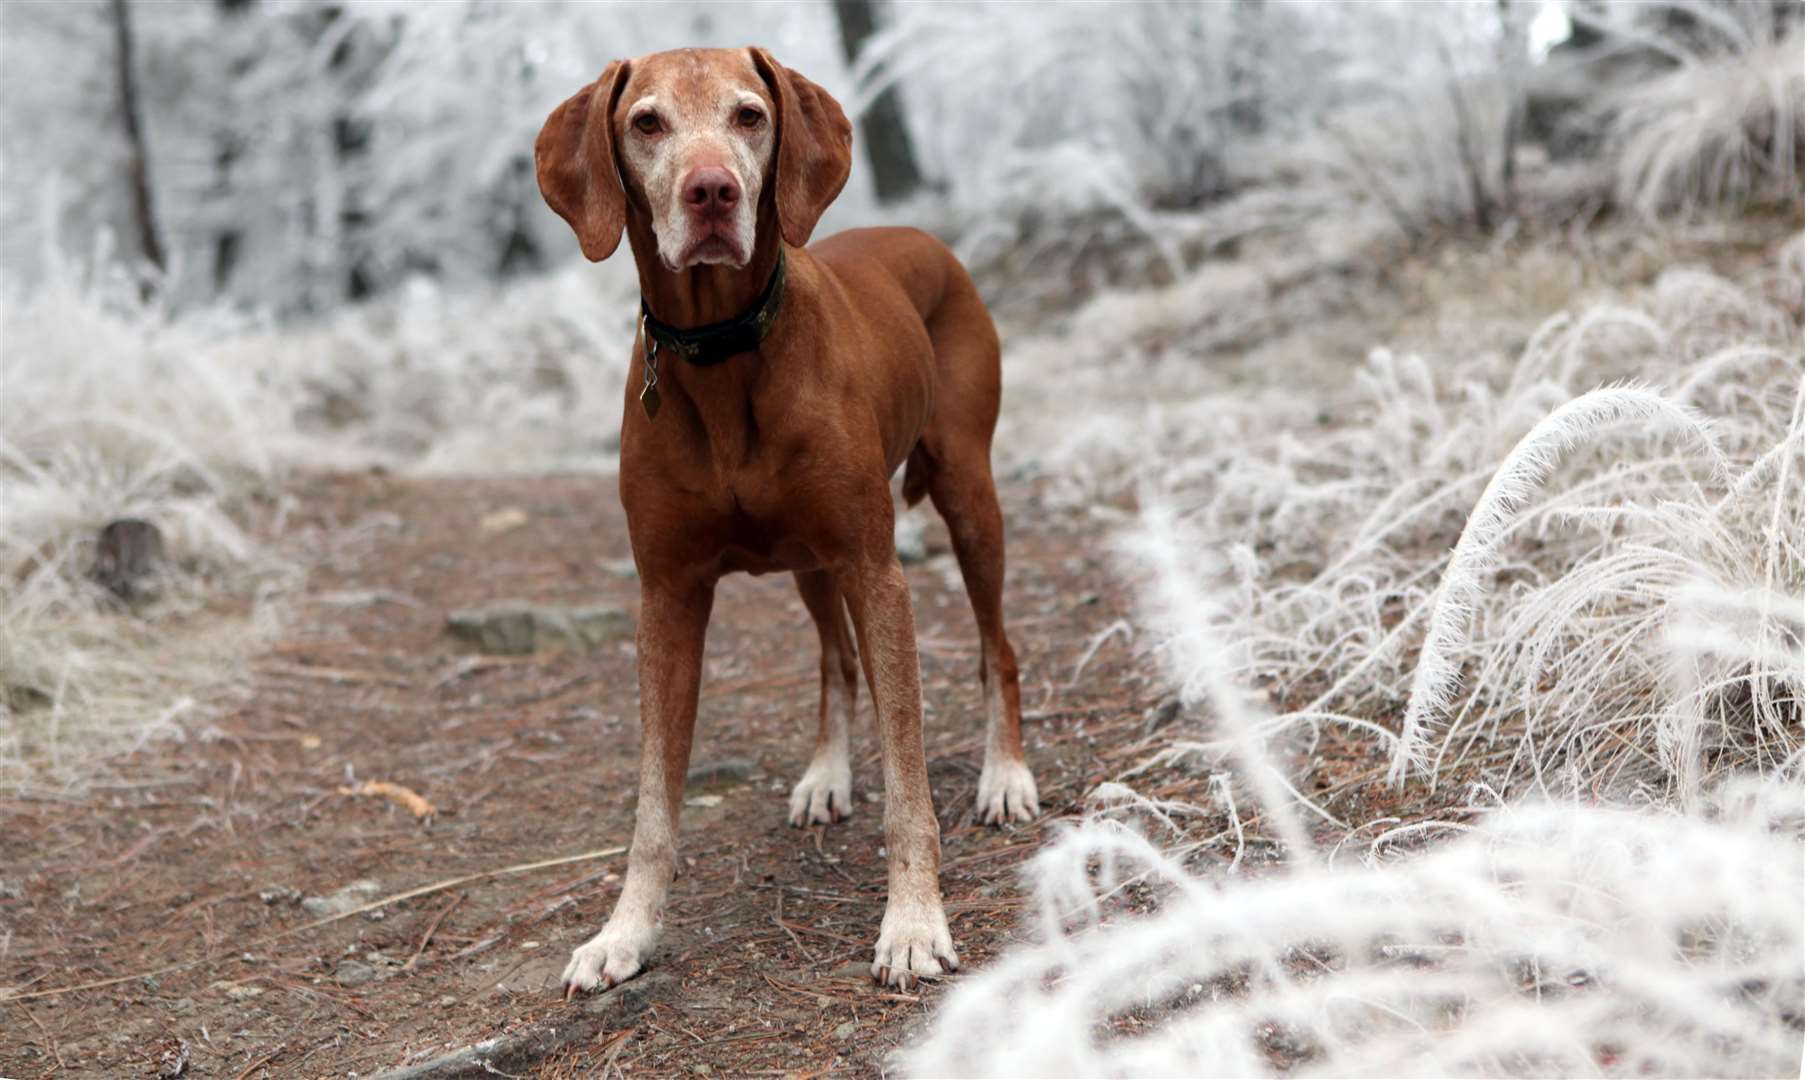 Dogs may need more meat in their diet during the winter months